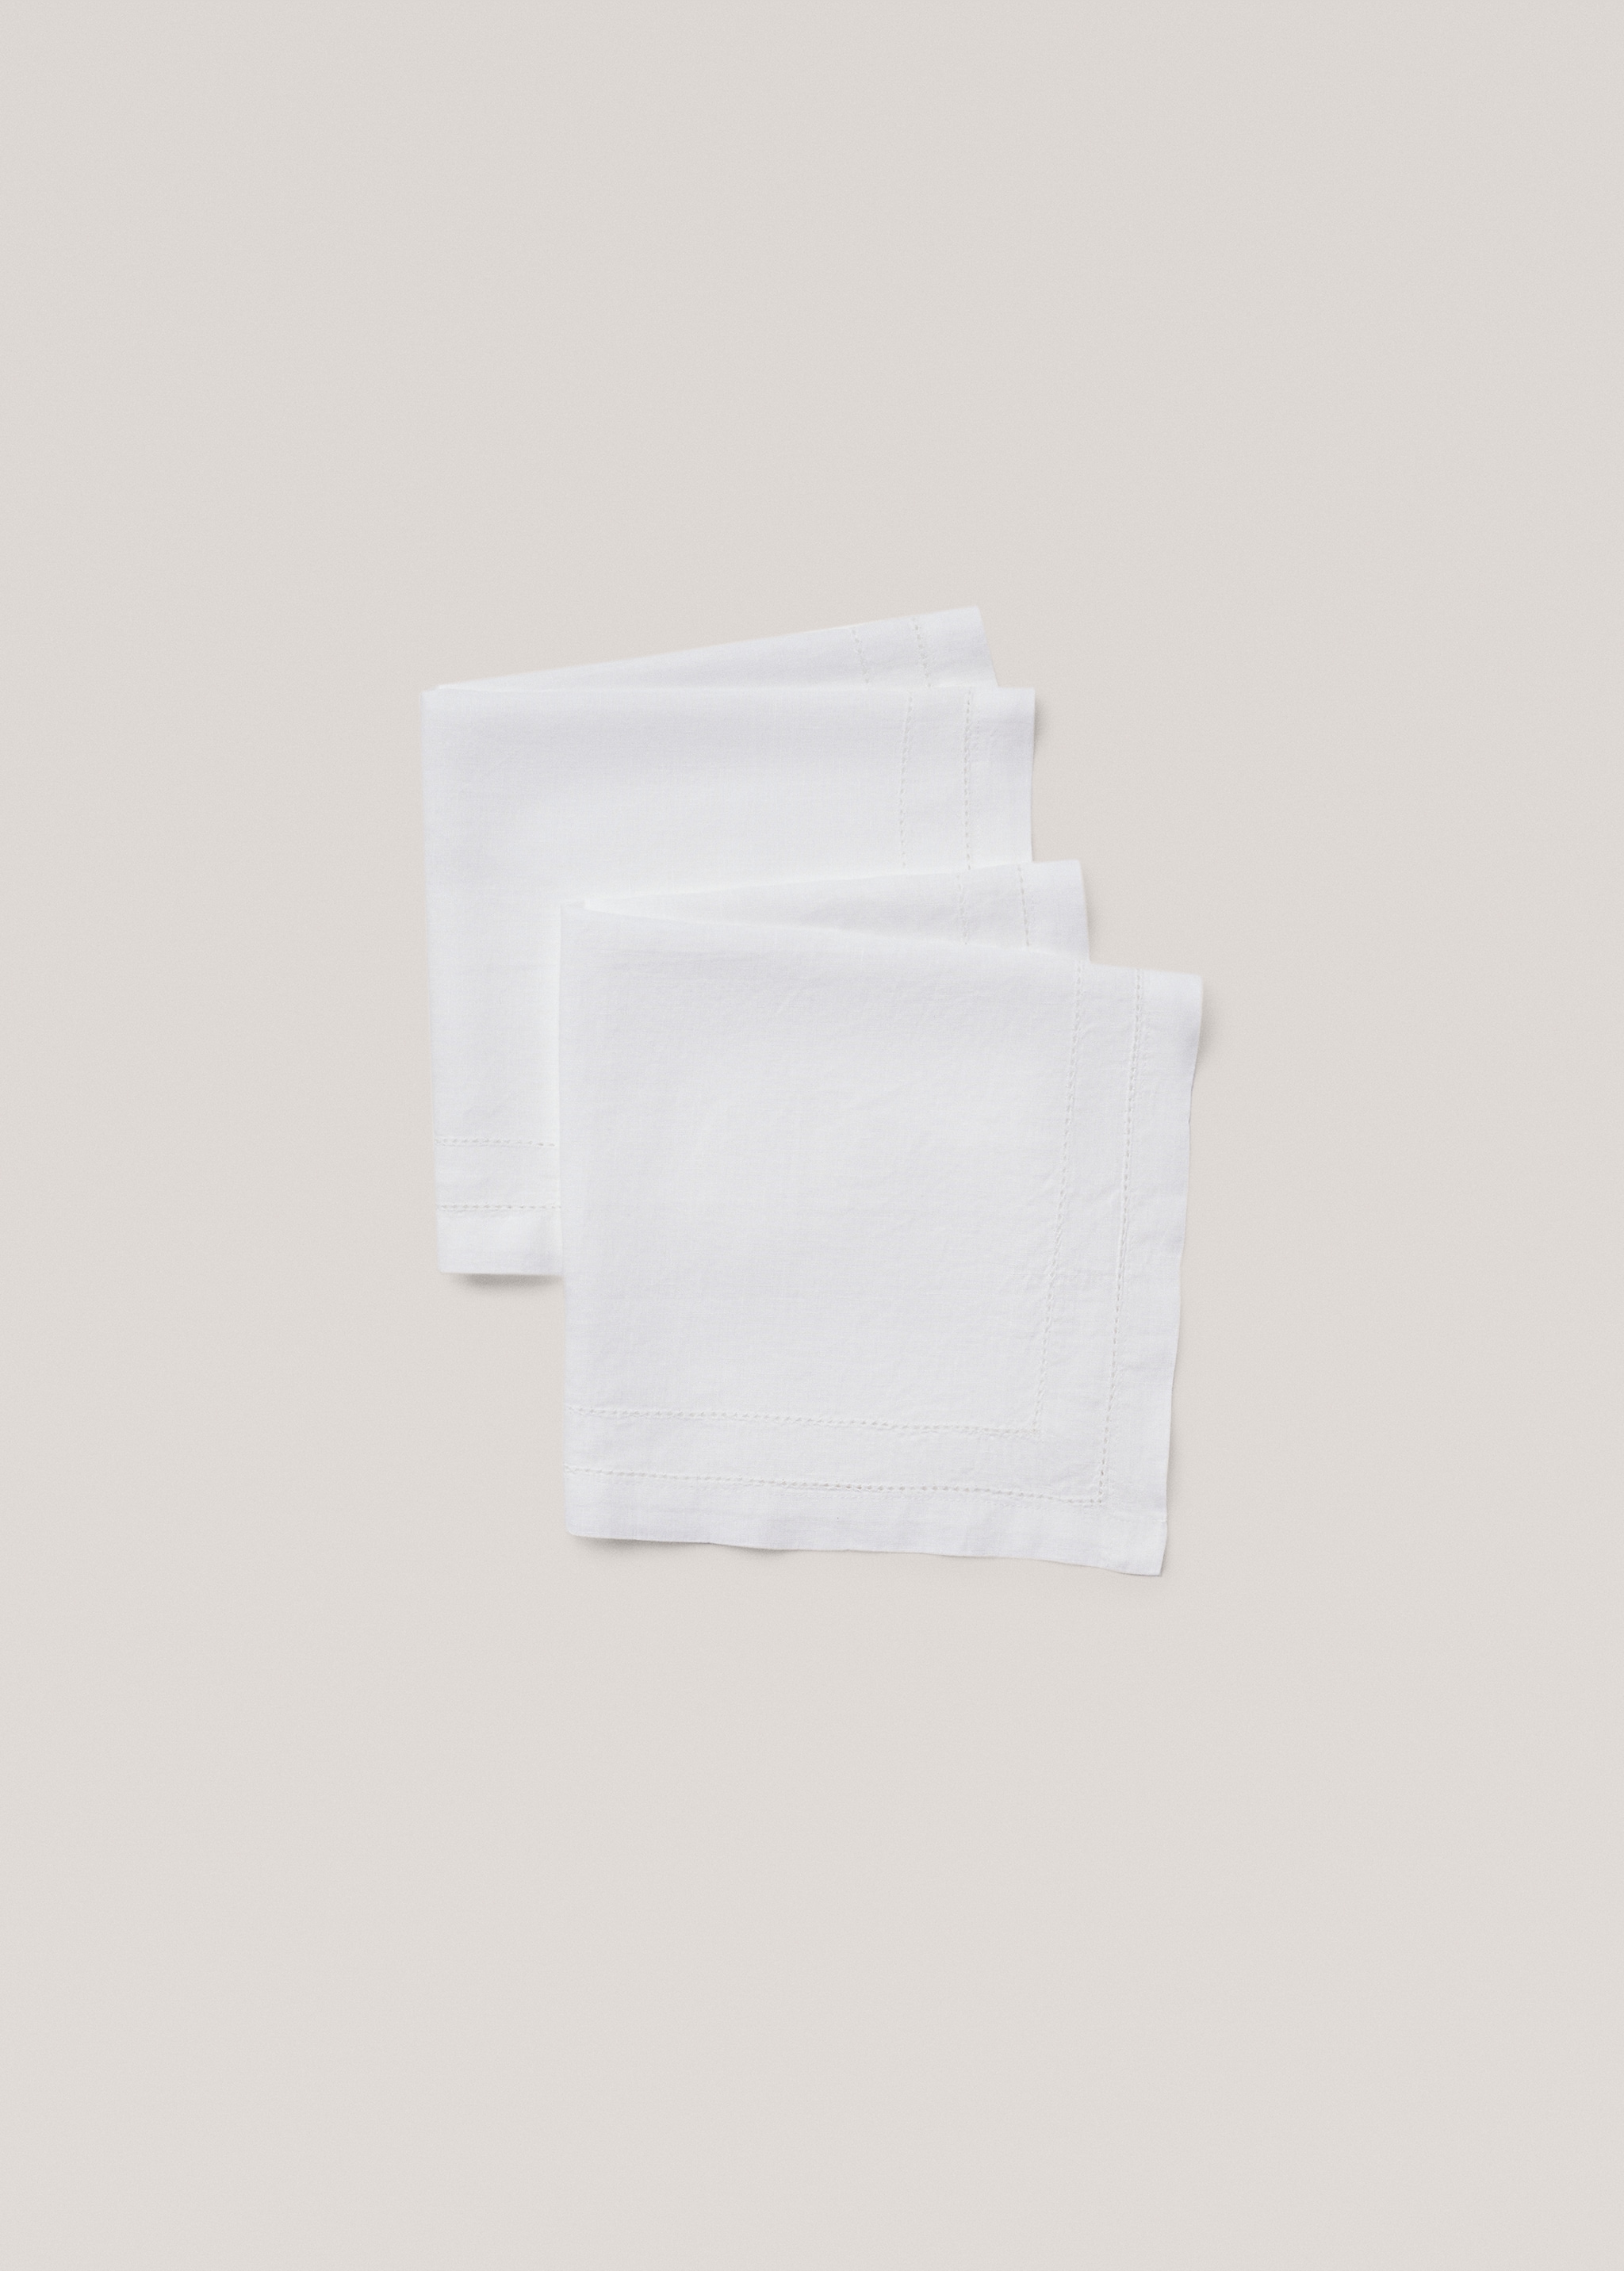 100% linen double-hemstitch napkin - Article without model